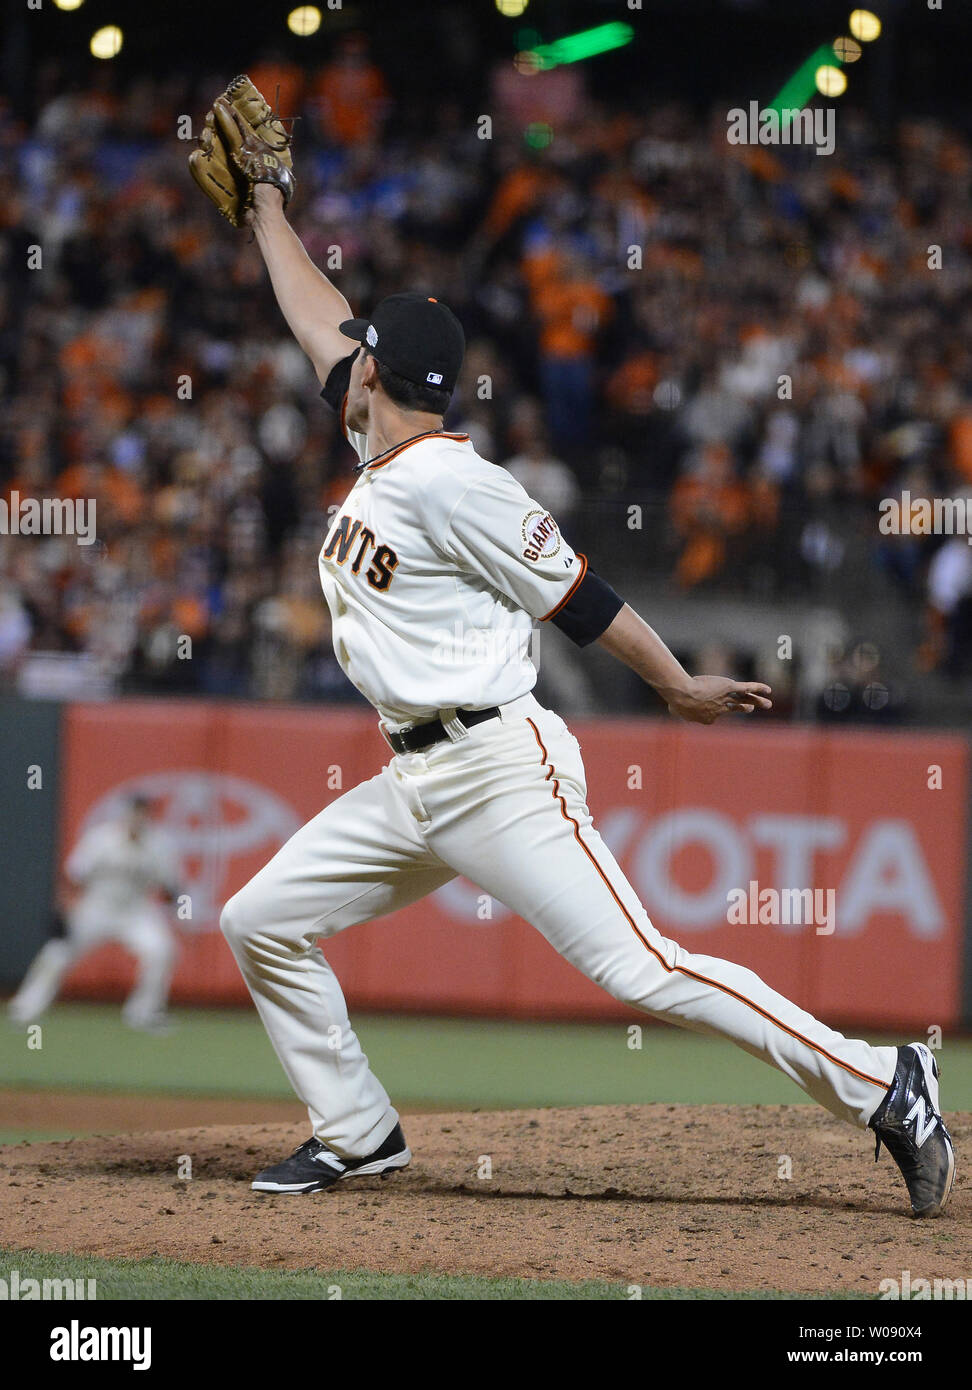 San Francisco Giants reliever Javier Lopez turns and watches  RBI single by Kansas City first baseman Eric Hosmer during the sixth inning of game 3 of the World Series at AT&T Park in San Francisco on October 24, 2014.  UPI/Terry Schmitt Stock Photo